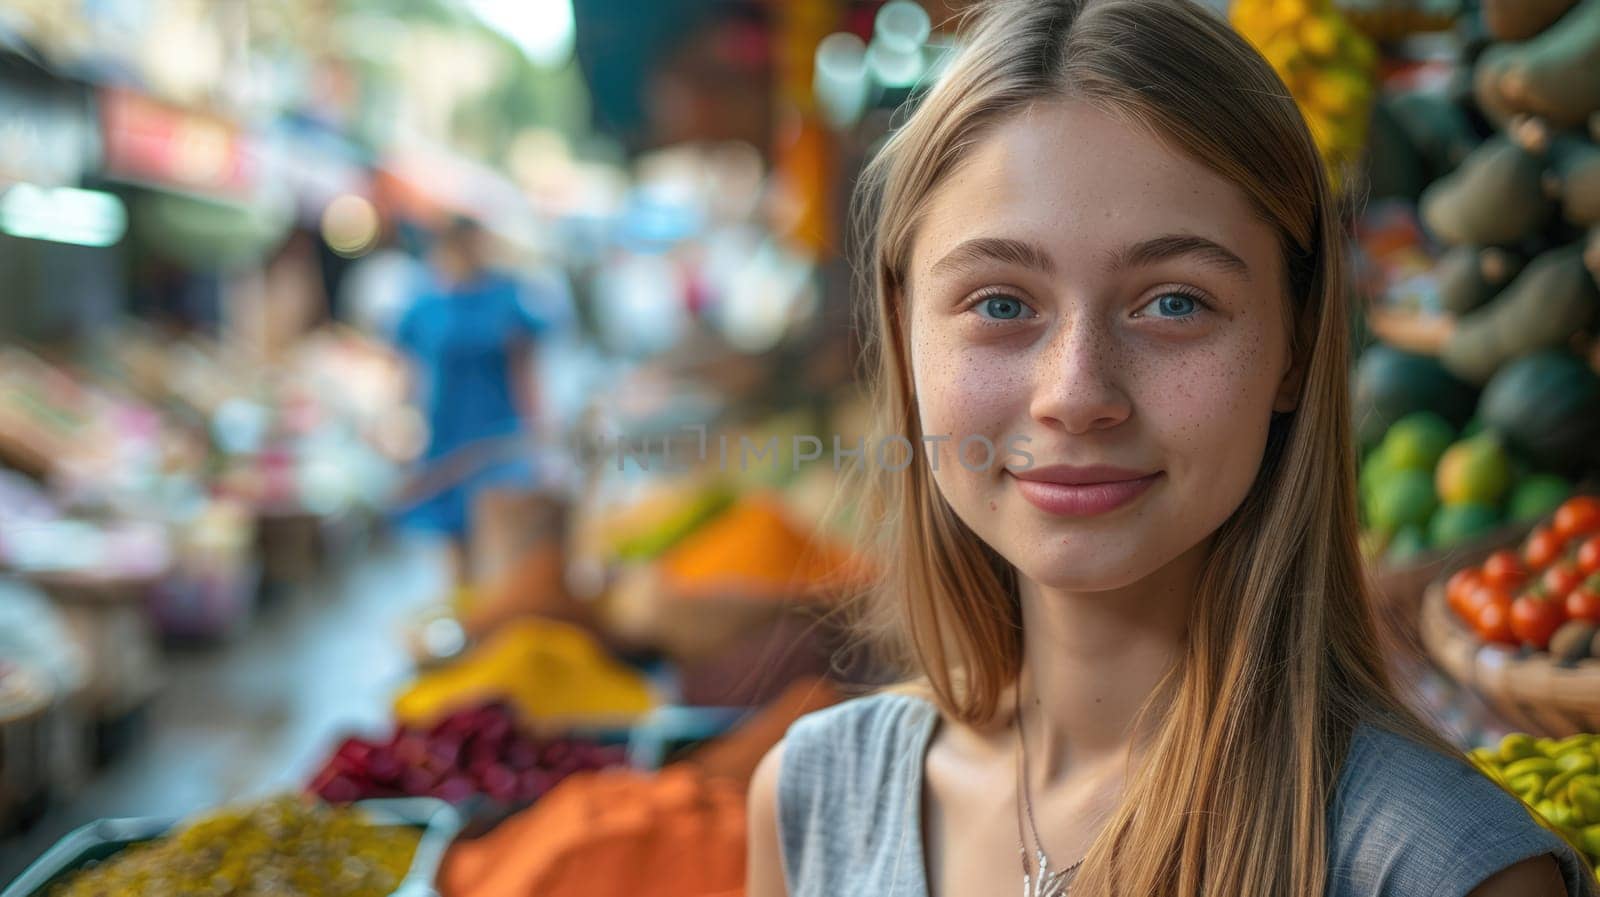 European girl against the backdrop of colorful market stalls by natali_brill